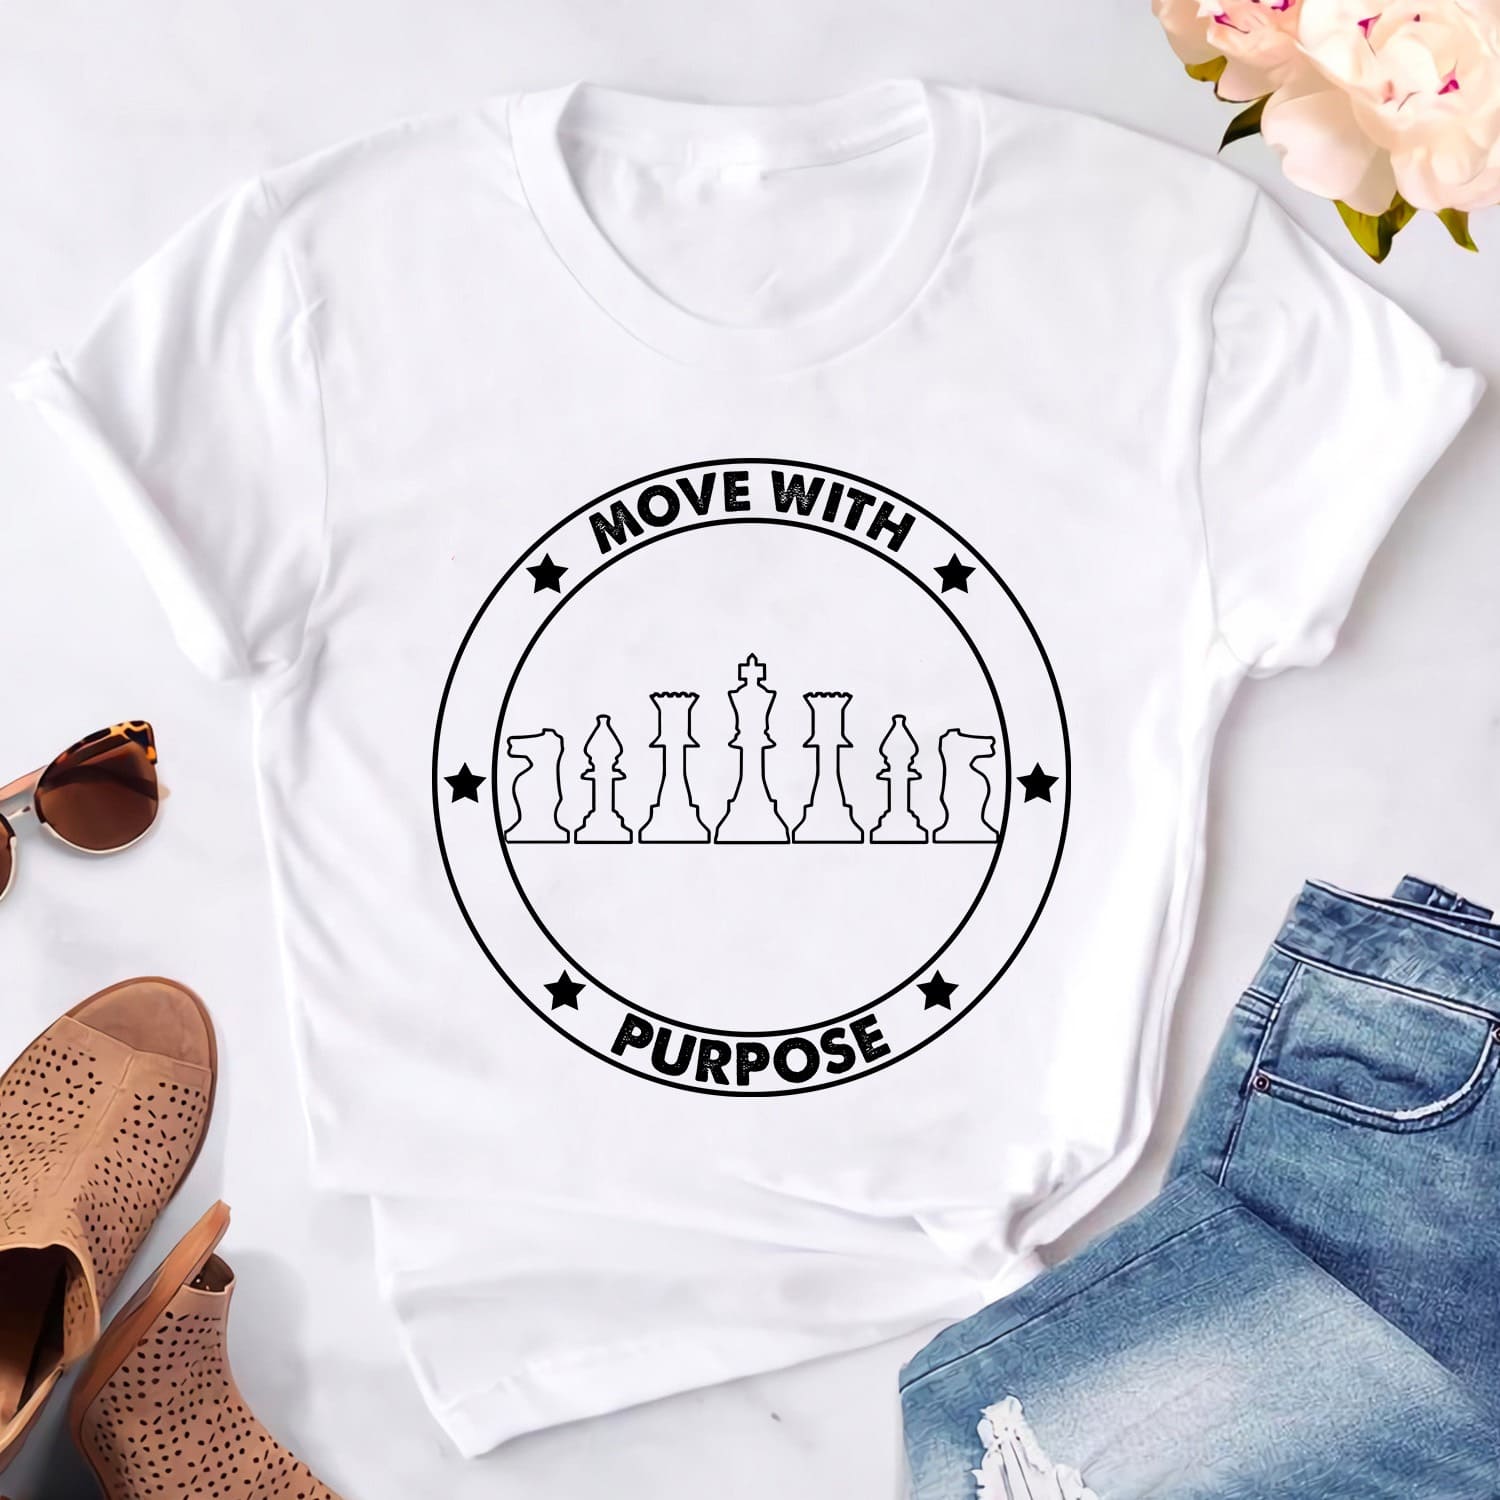 Chessboard Graphic T-shirt - Move with purpose